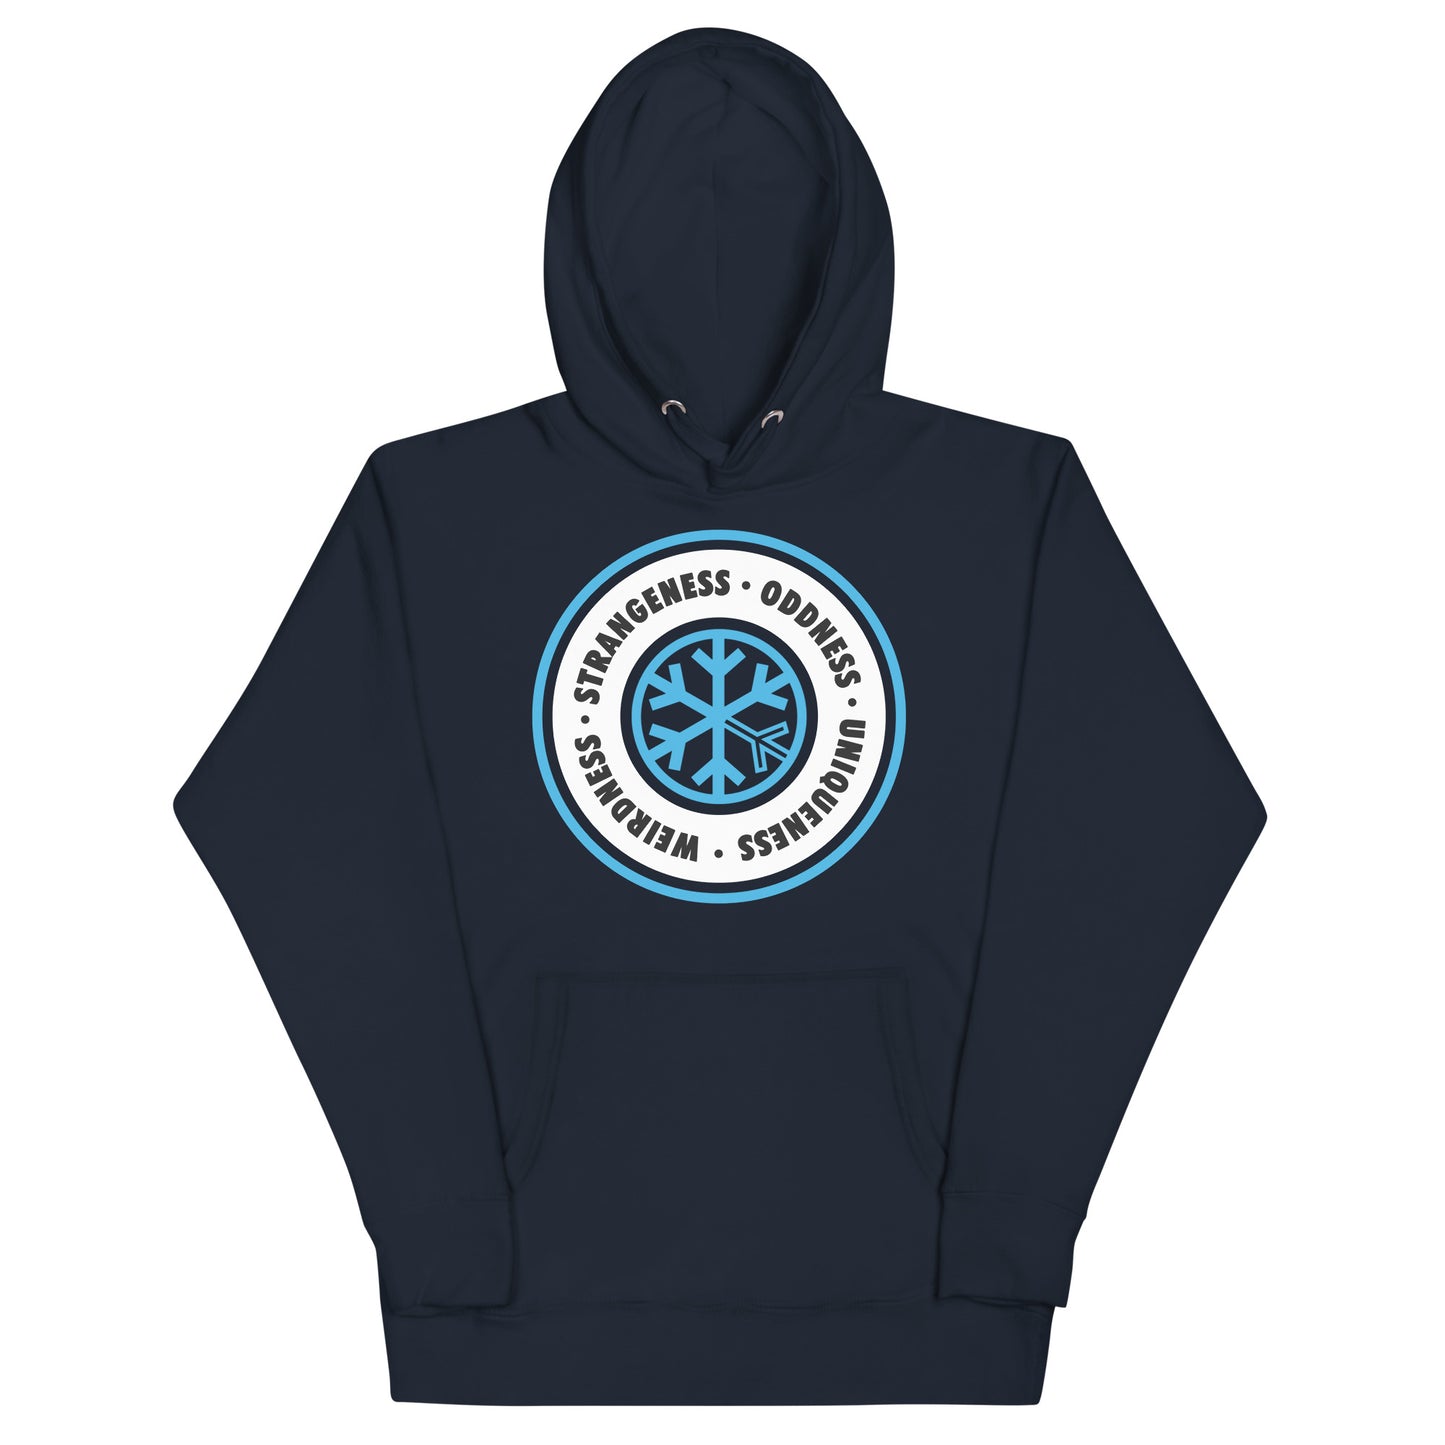 Circle of Weirdness hoodie navy by B.Different Clothing street art graffiti inspired streetwear brand